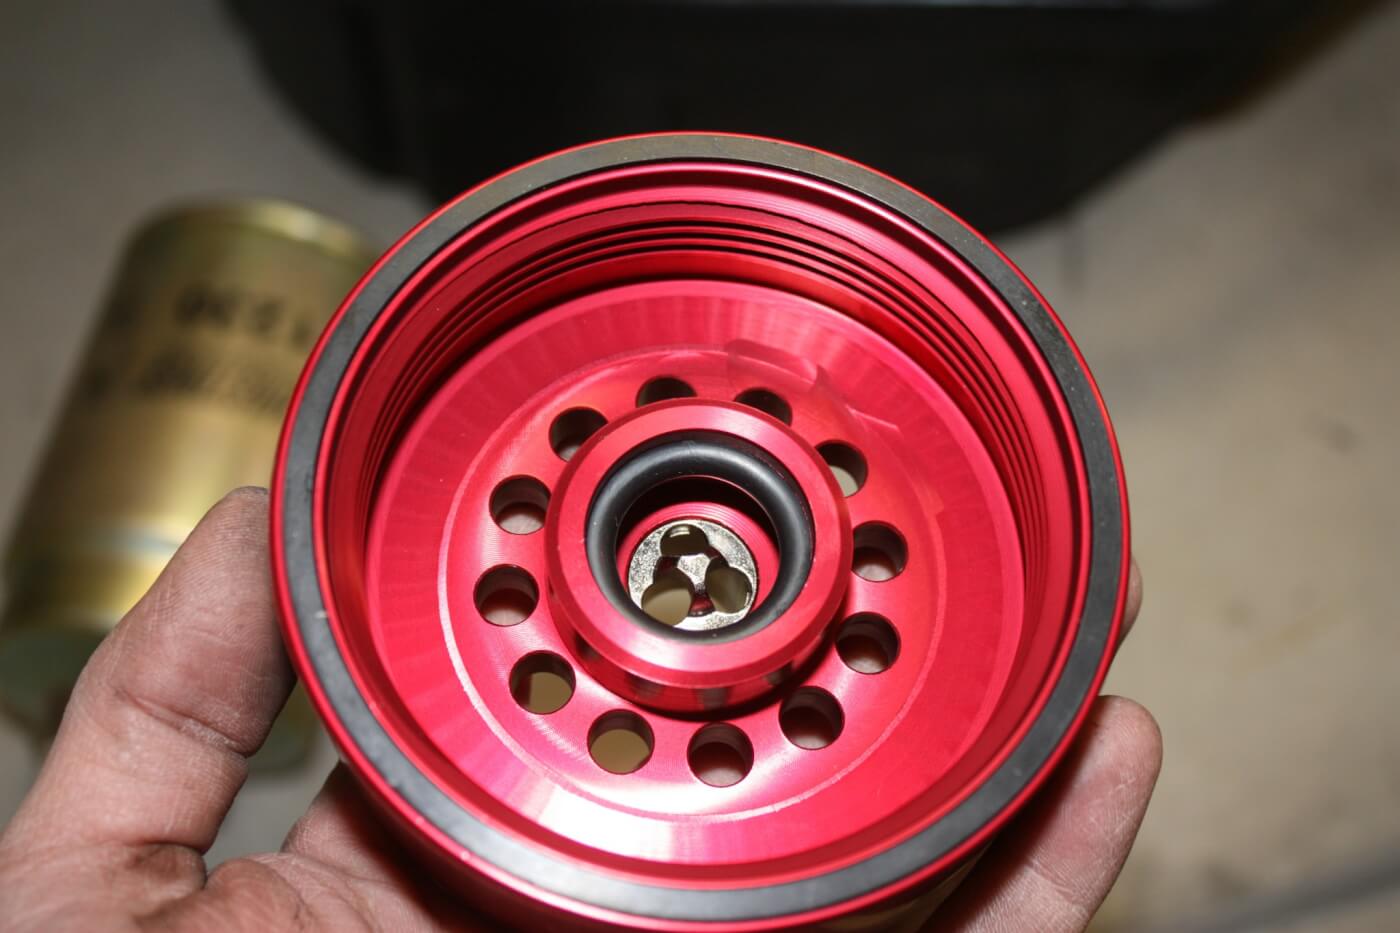 The custom-machined Adaptor has the same internal threads as a stock fuel filter, so it simply threads right onto the factory base. While the bottom side of the filter has a machined external thread to accept the new Cat spin-on filter. Once the Adaptor is installed, it can remain in place for all future services; you’ll just need to swap the filter itself.